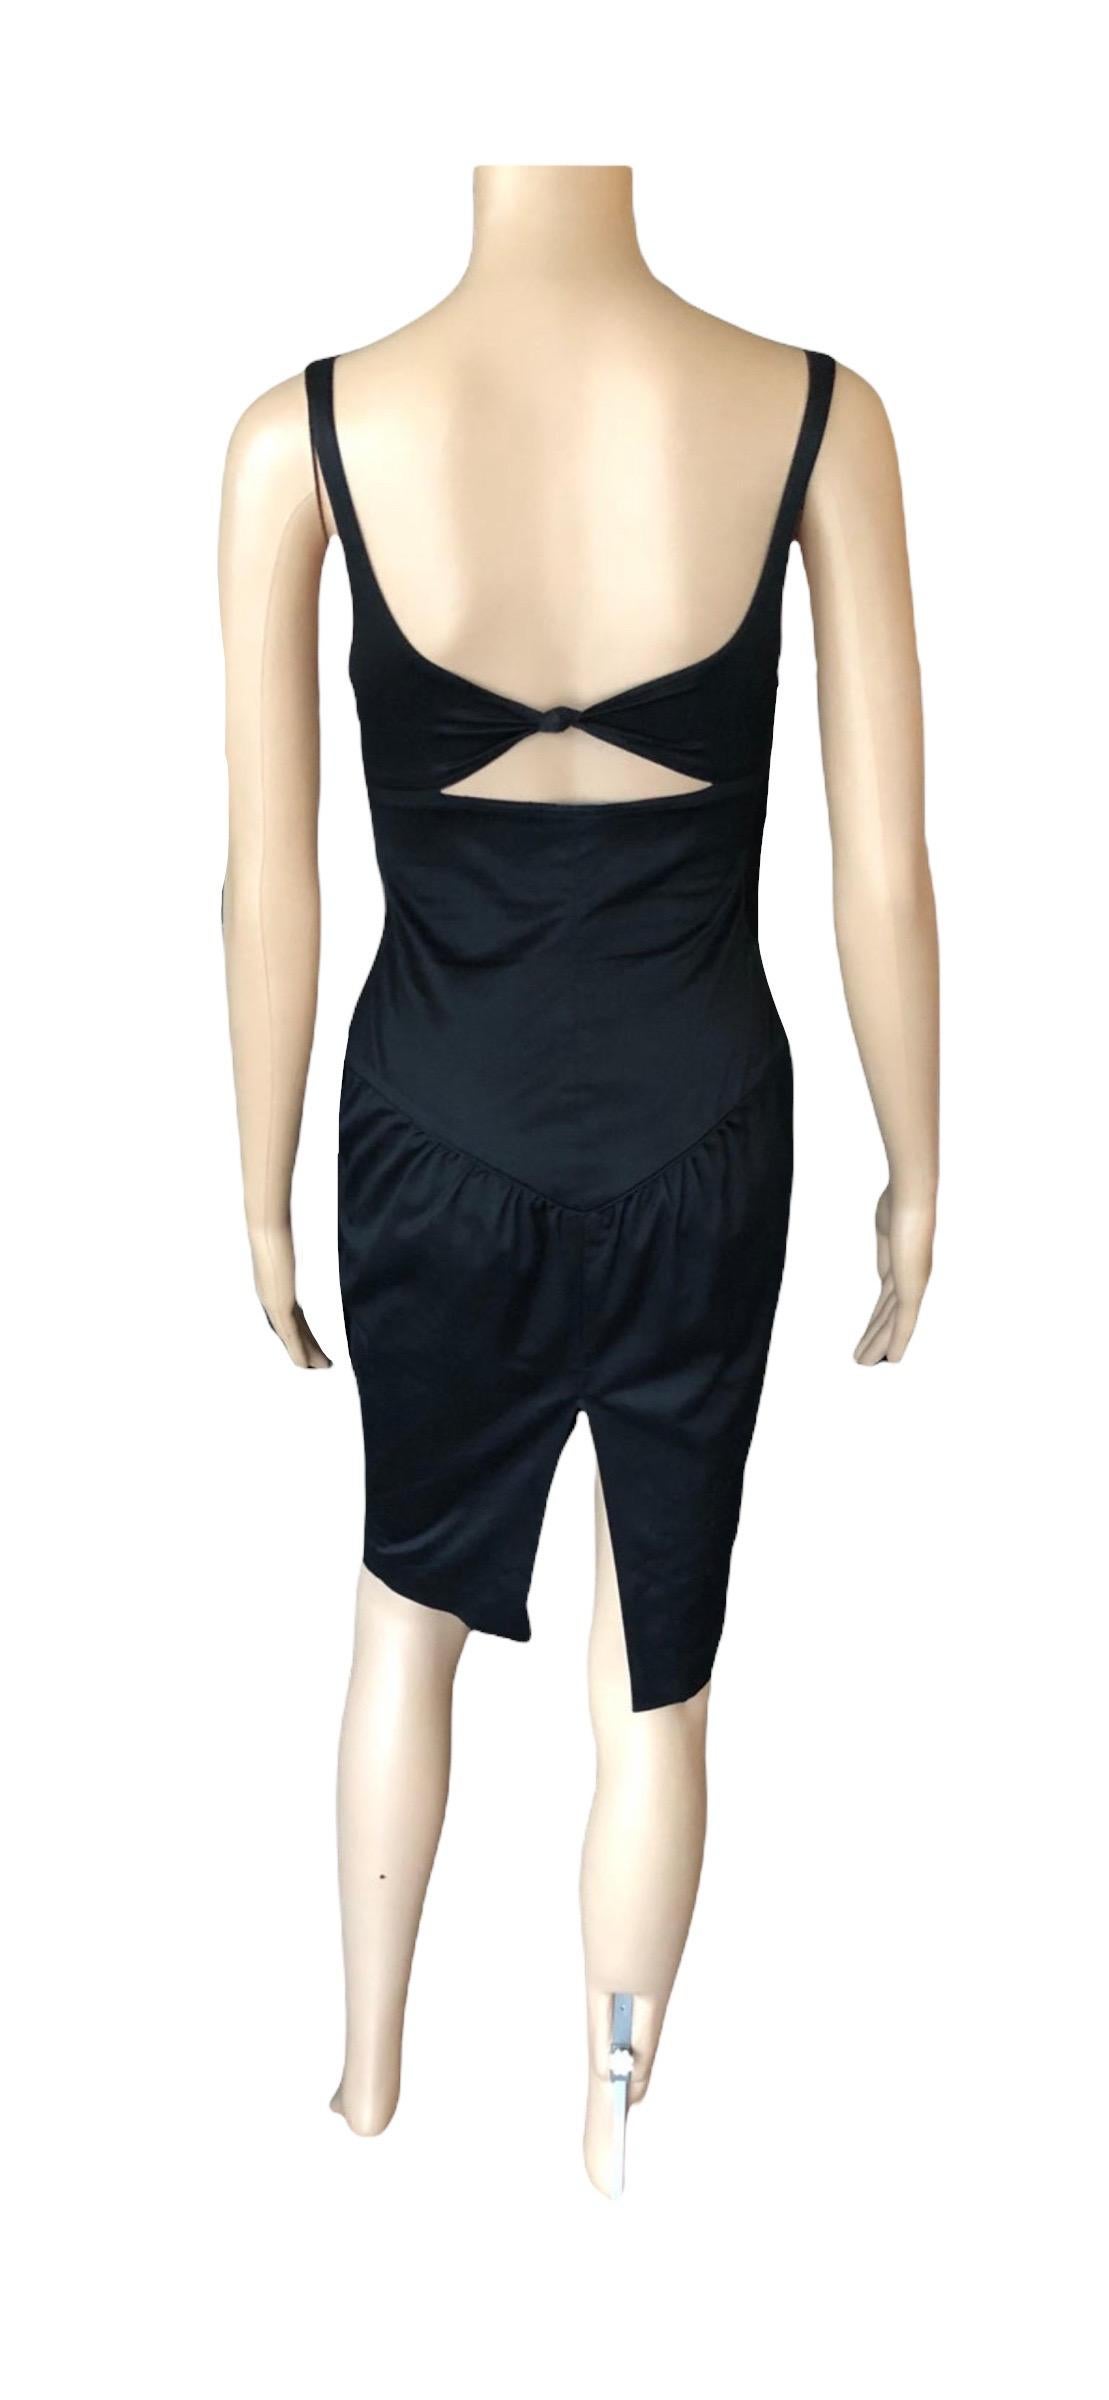 Tom Ford for Gucci 2003 Bustier Cutout Back Black Mini Dress 2